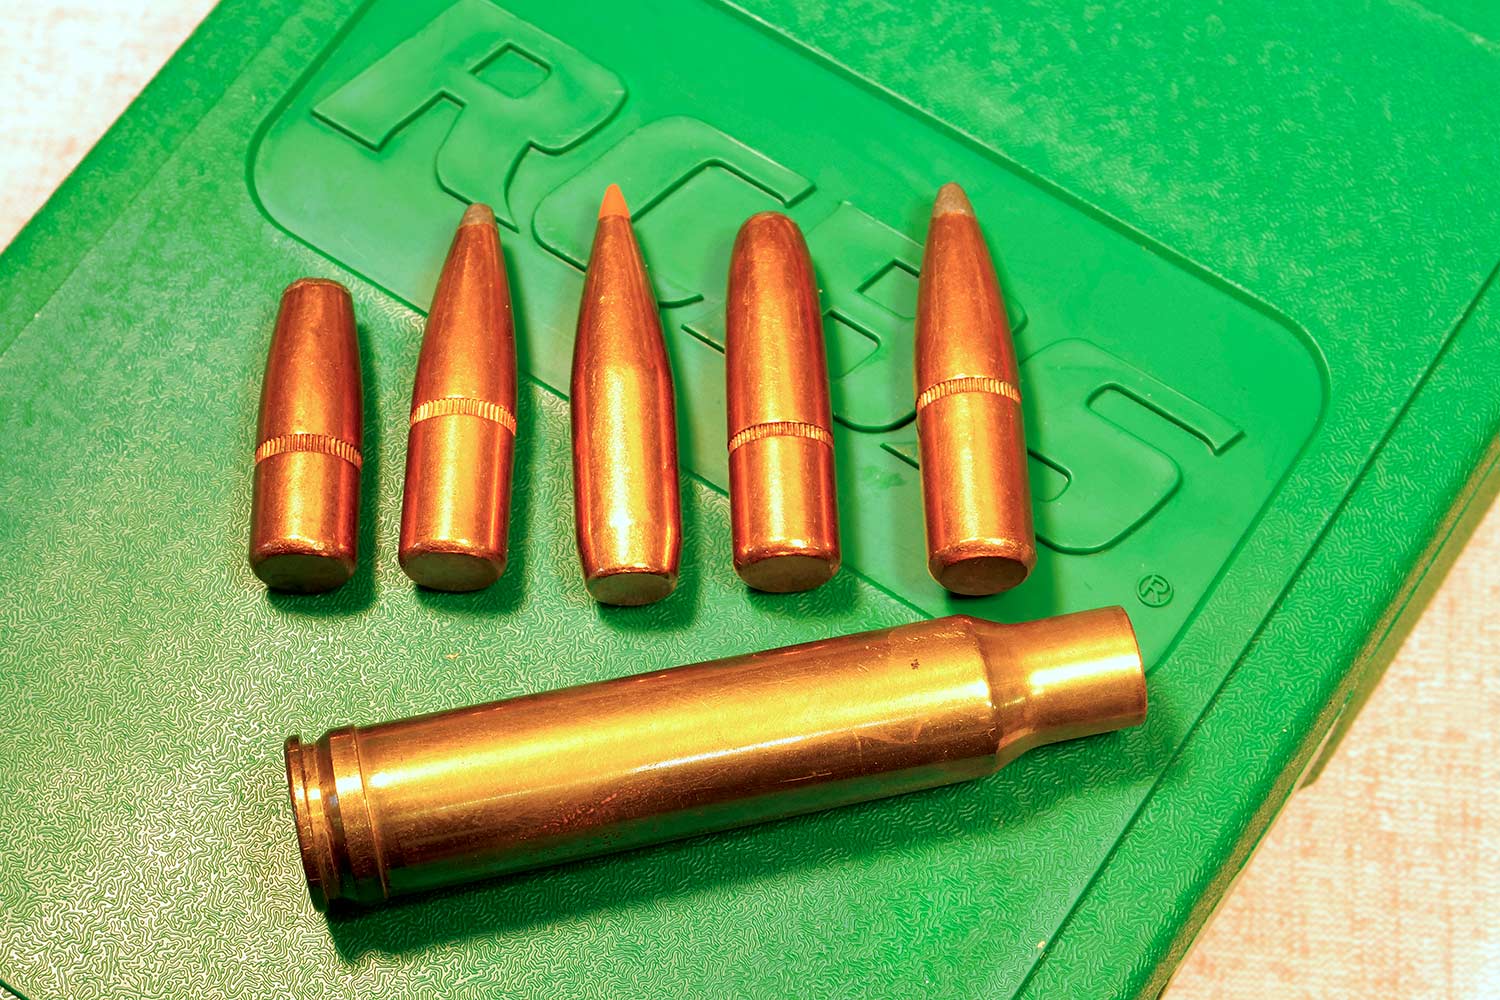 A lineup of ammos used in reloading.